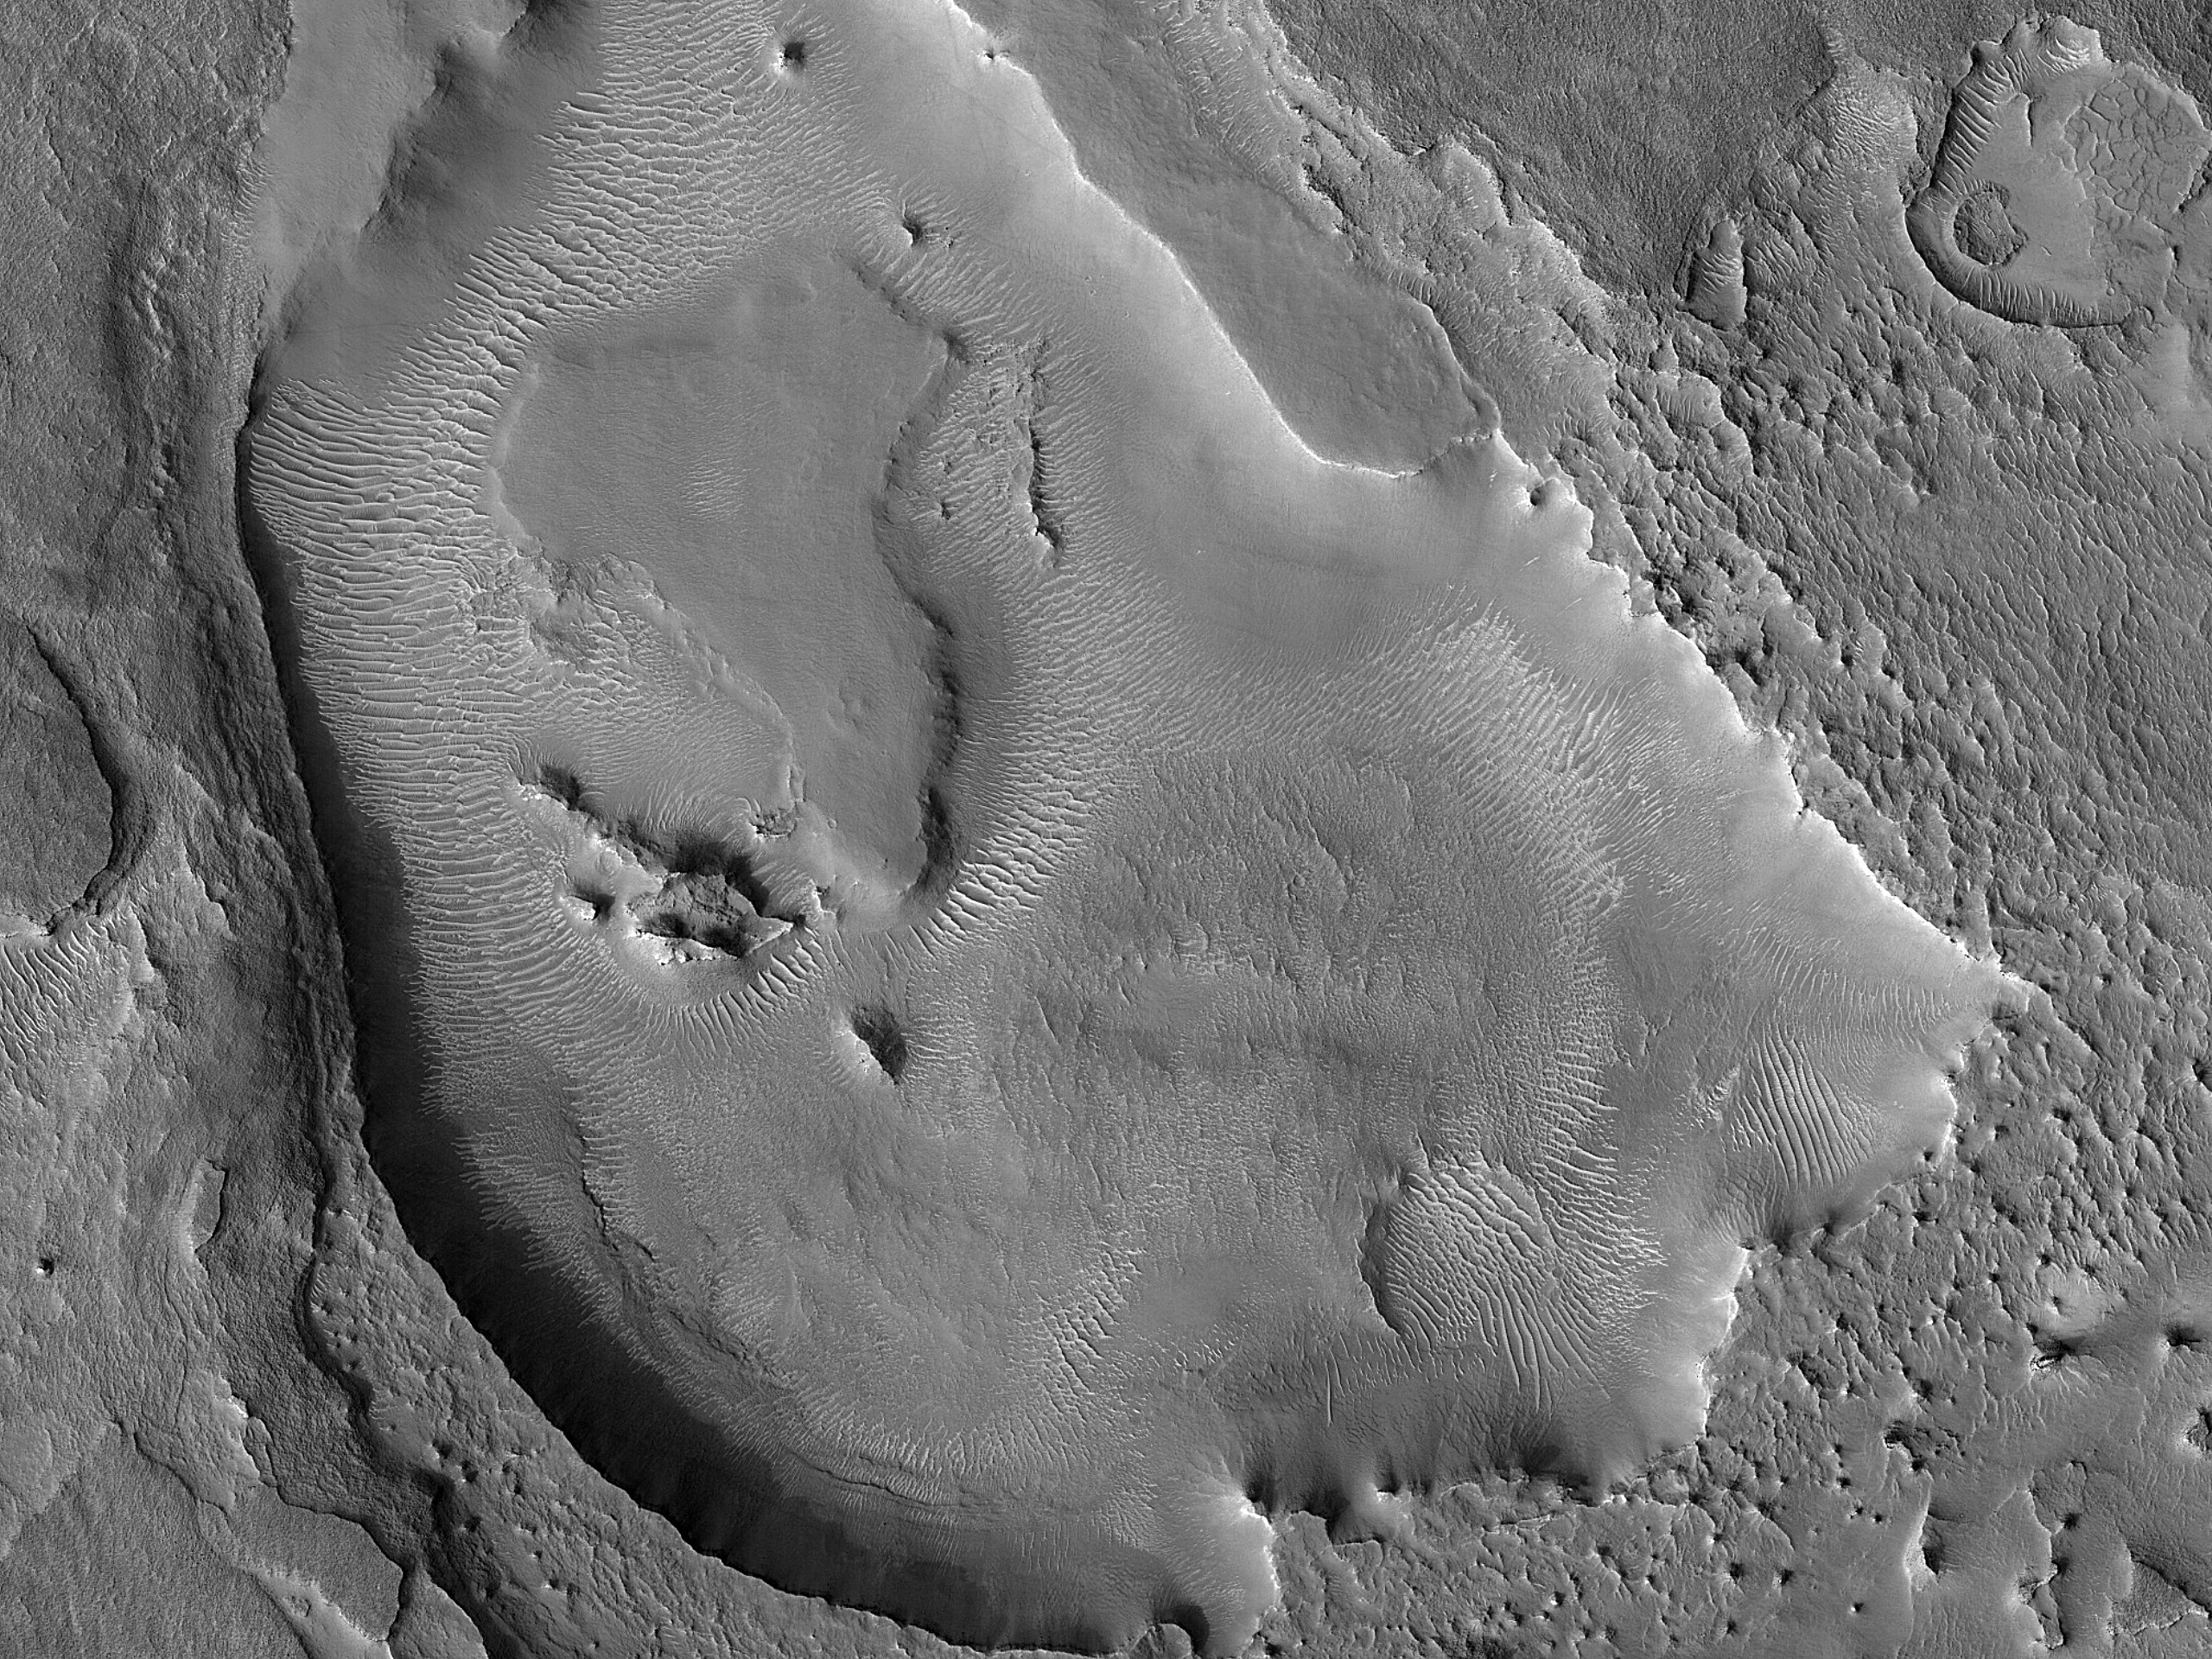 Layers in a Crater Depression near Auqakuh Vallis